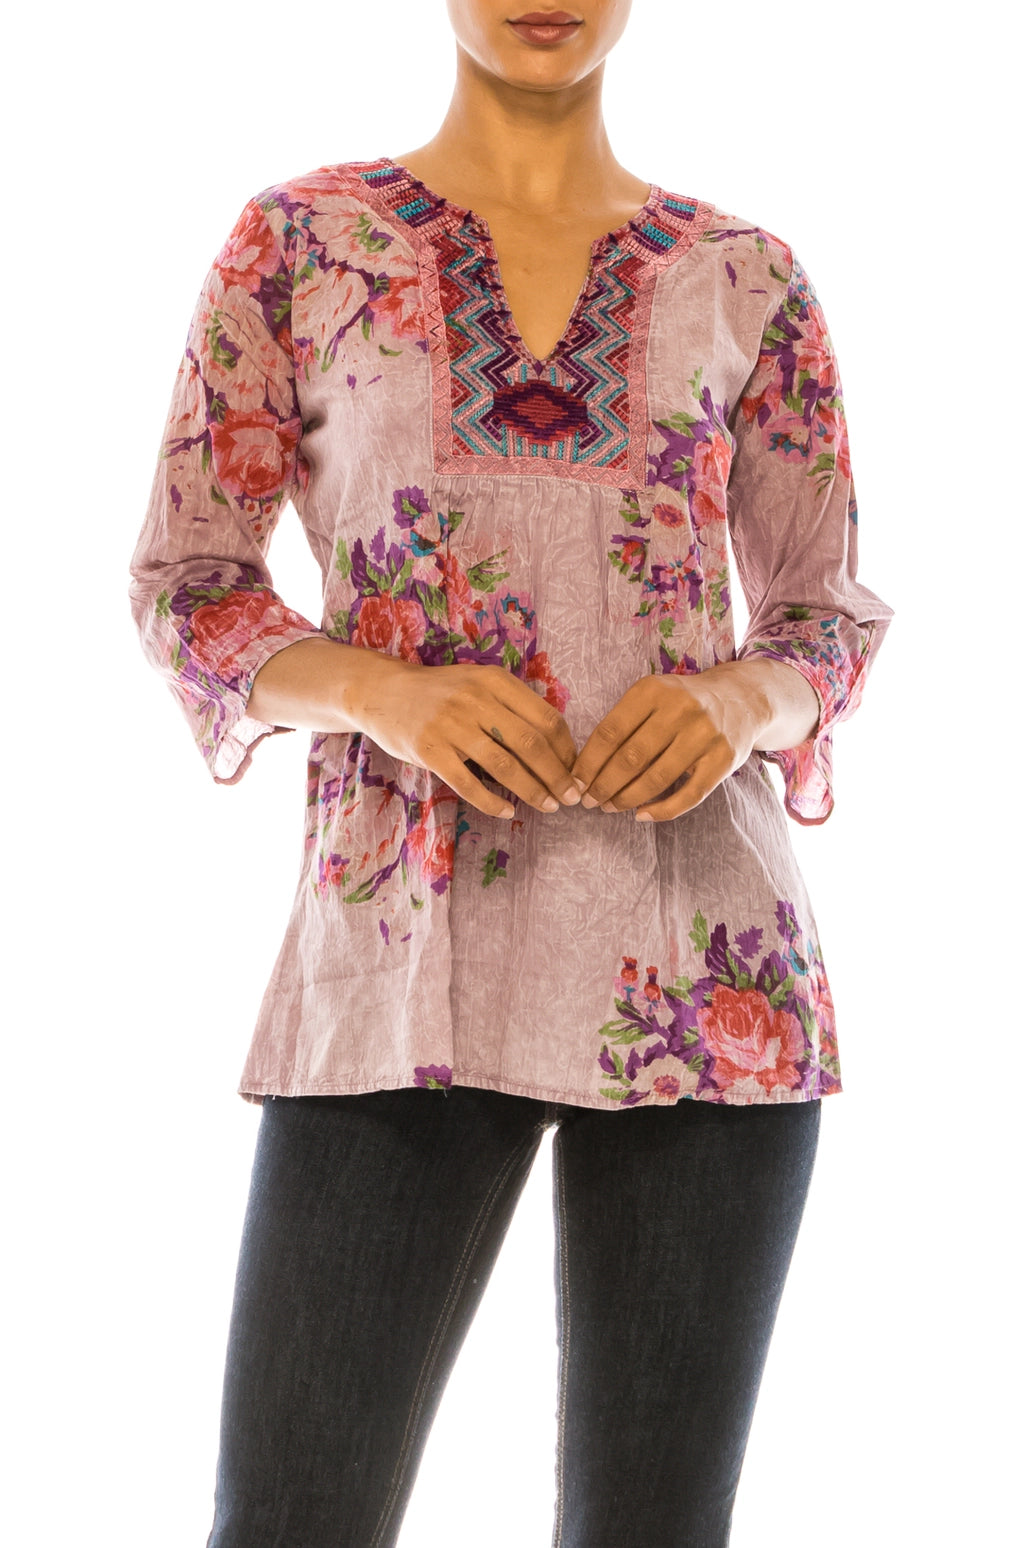 Vintage Boho Floral Tunic with Embroidery~ Also in Blue